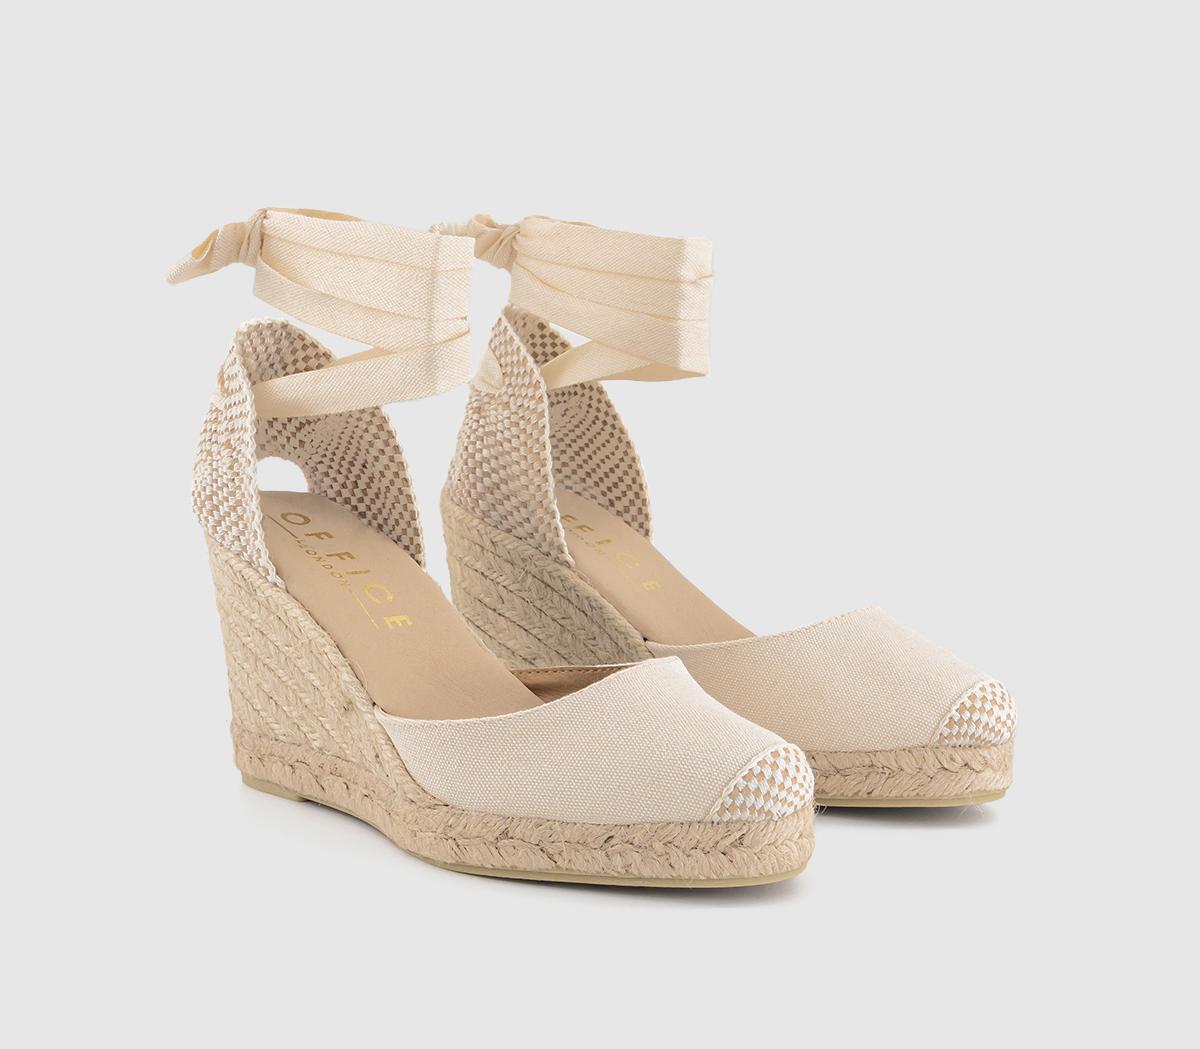 OFFICE Womens Marmalade Ankle Tie Espadrille Wedges Cream Canvas, 9